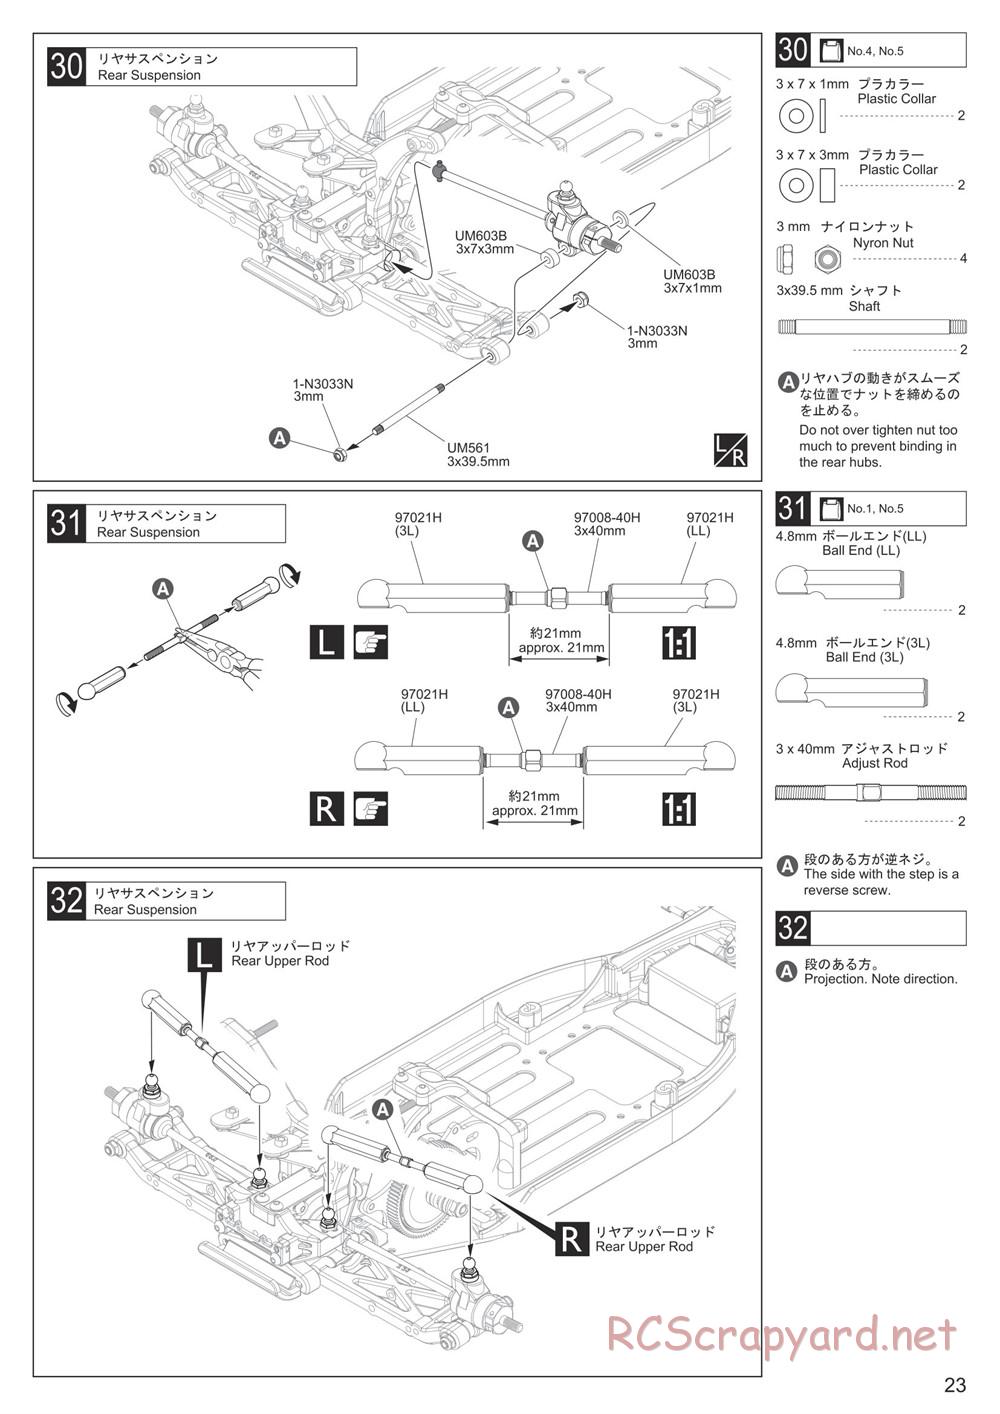 Kyosho - Ultima RB7 - Manual - Page 23